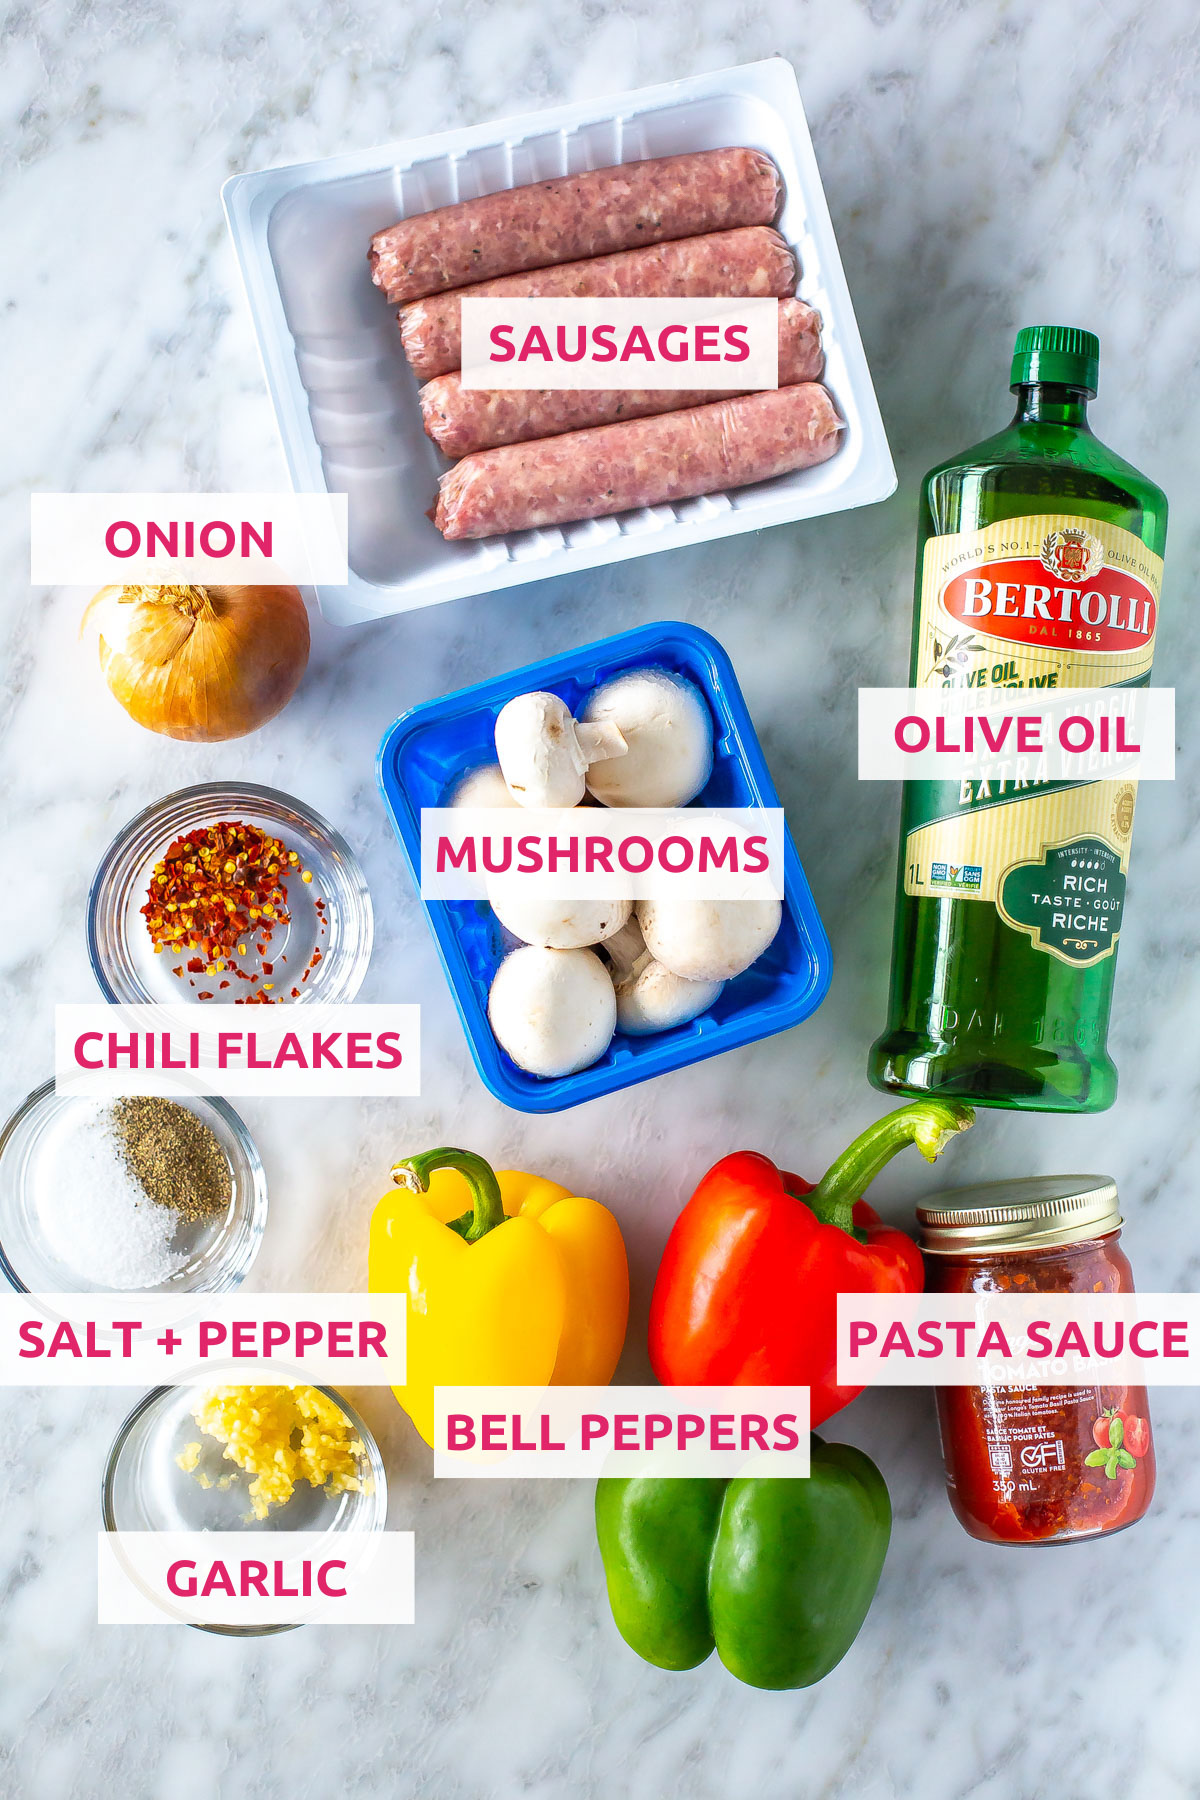 Ingredients for sausage, peppers and onions: sausages, olive oil, mushrooms, onion, bell peppers, chili flakes, garlic, pasta sauce and salt and pepper.